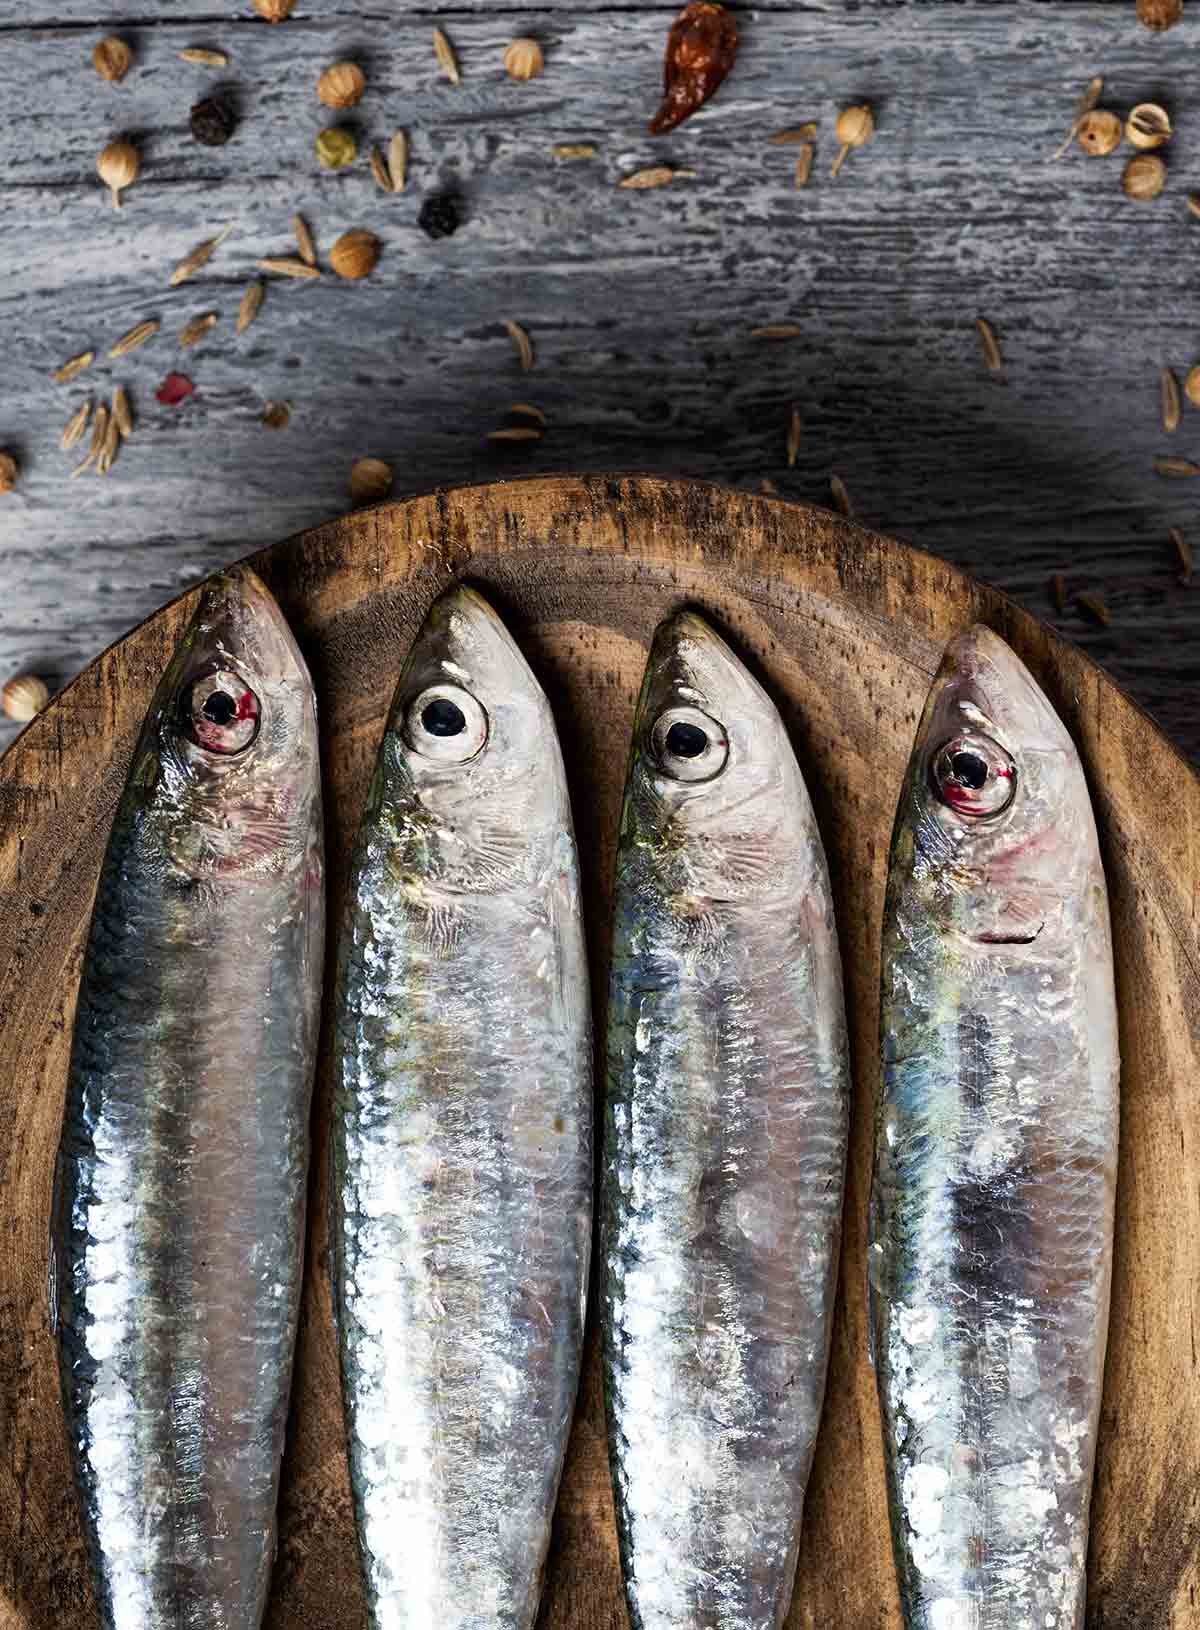 A close up shot of 4 whole sardines on a wooden plate.